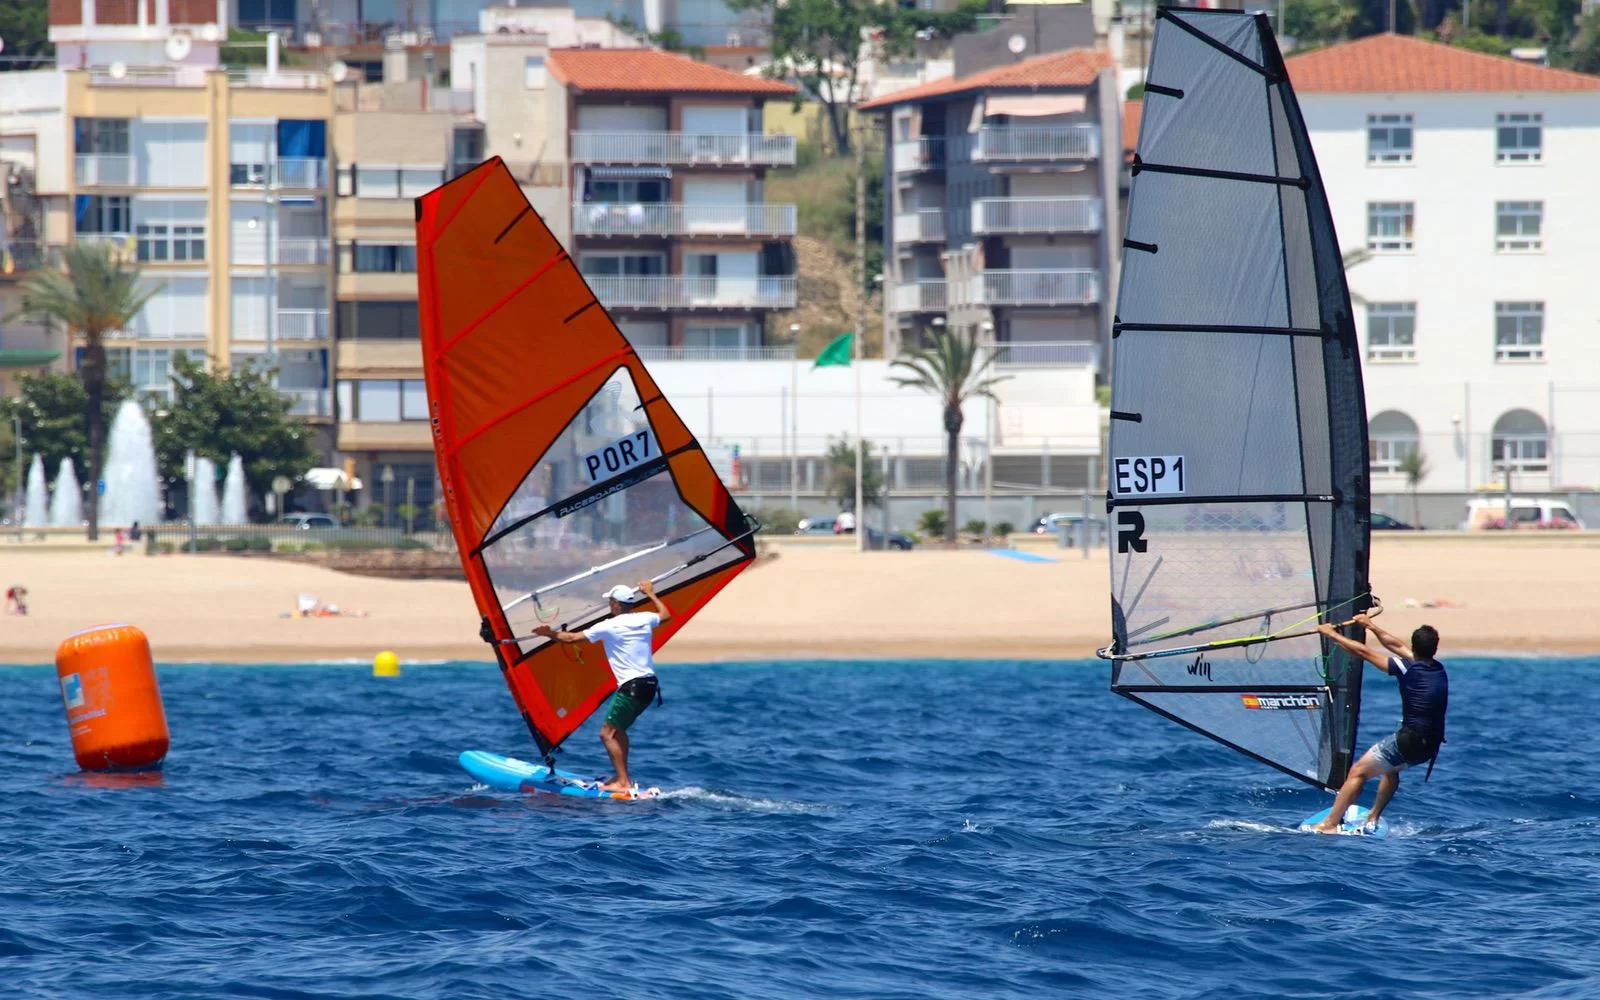 Joao reaching the downwind mark in front